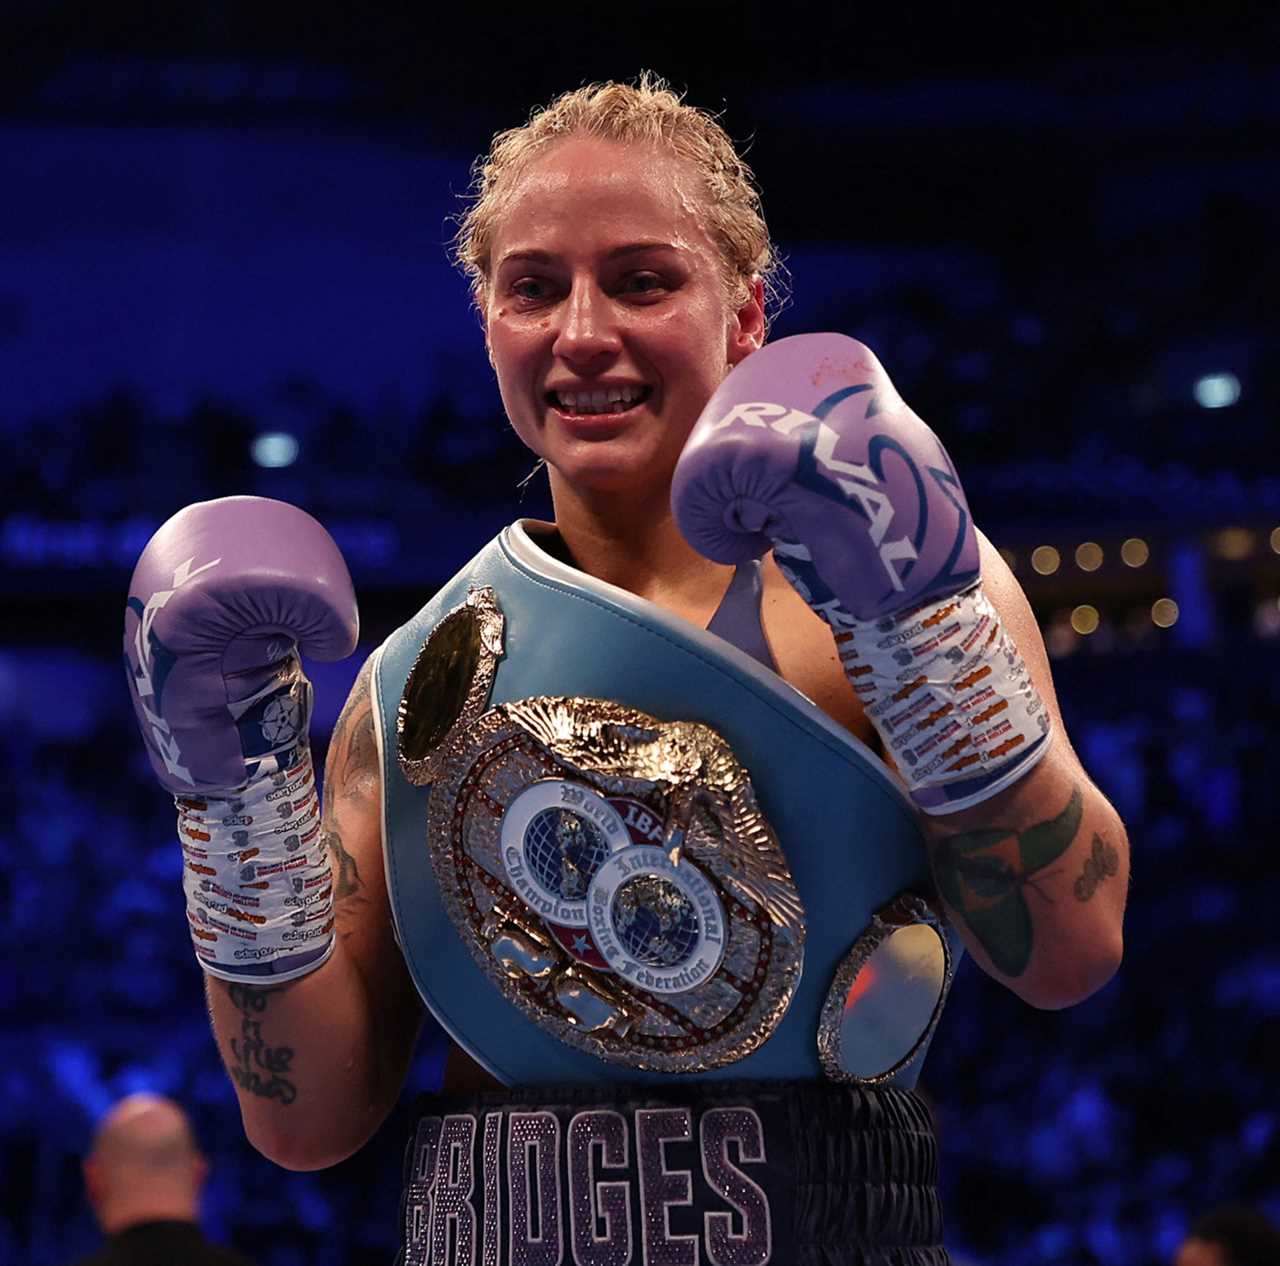 How Ebanie bridges became IBF champion. She silenced the critics and delighted her fans with sexy lingerie during weigh-ins